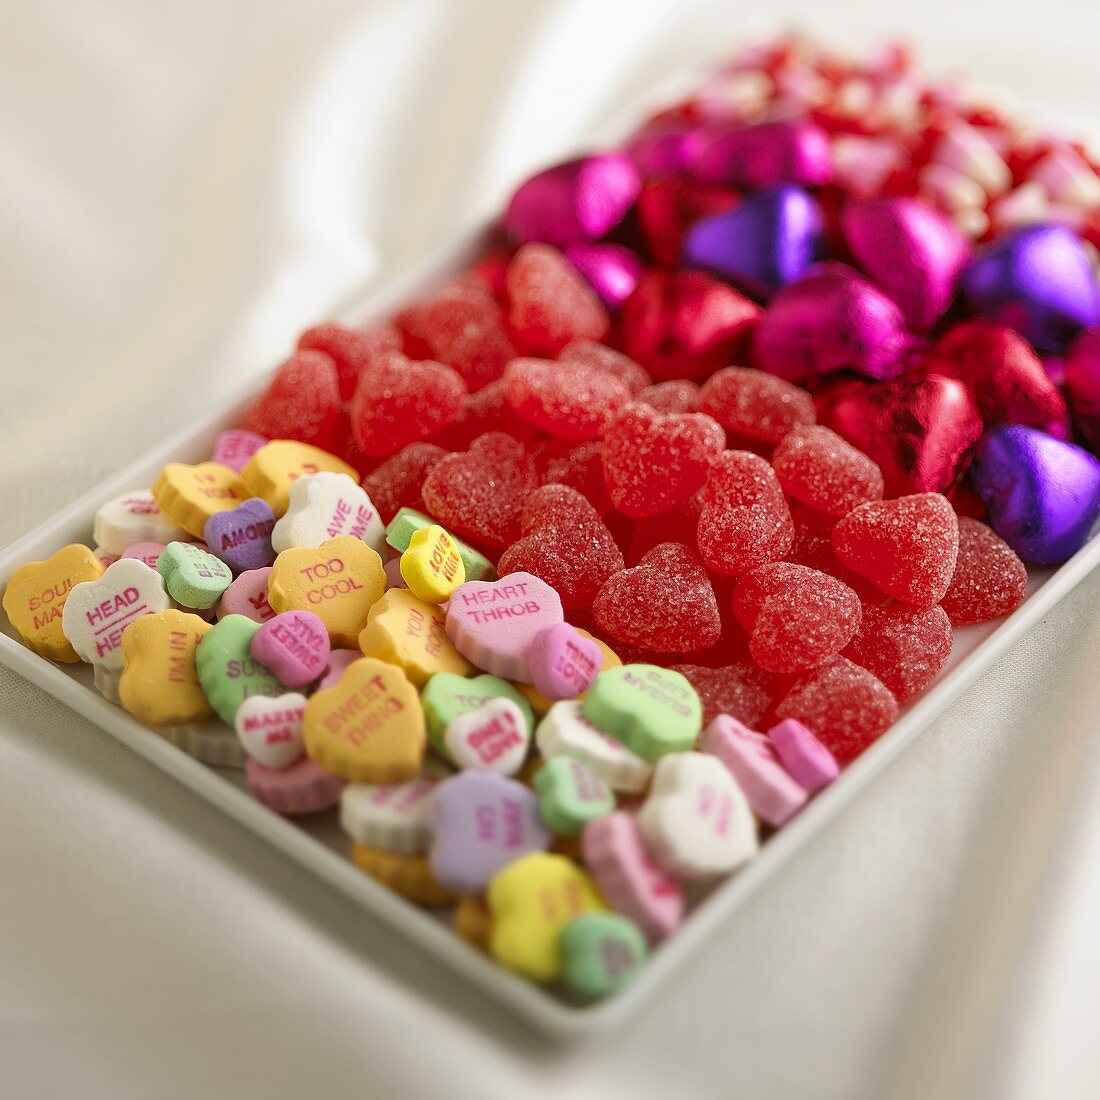 A Tray of Assorted Valentine's Day Candy